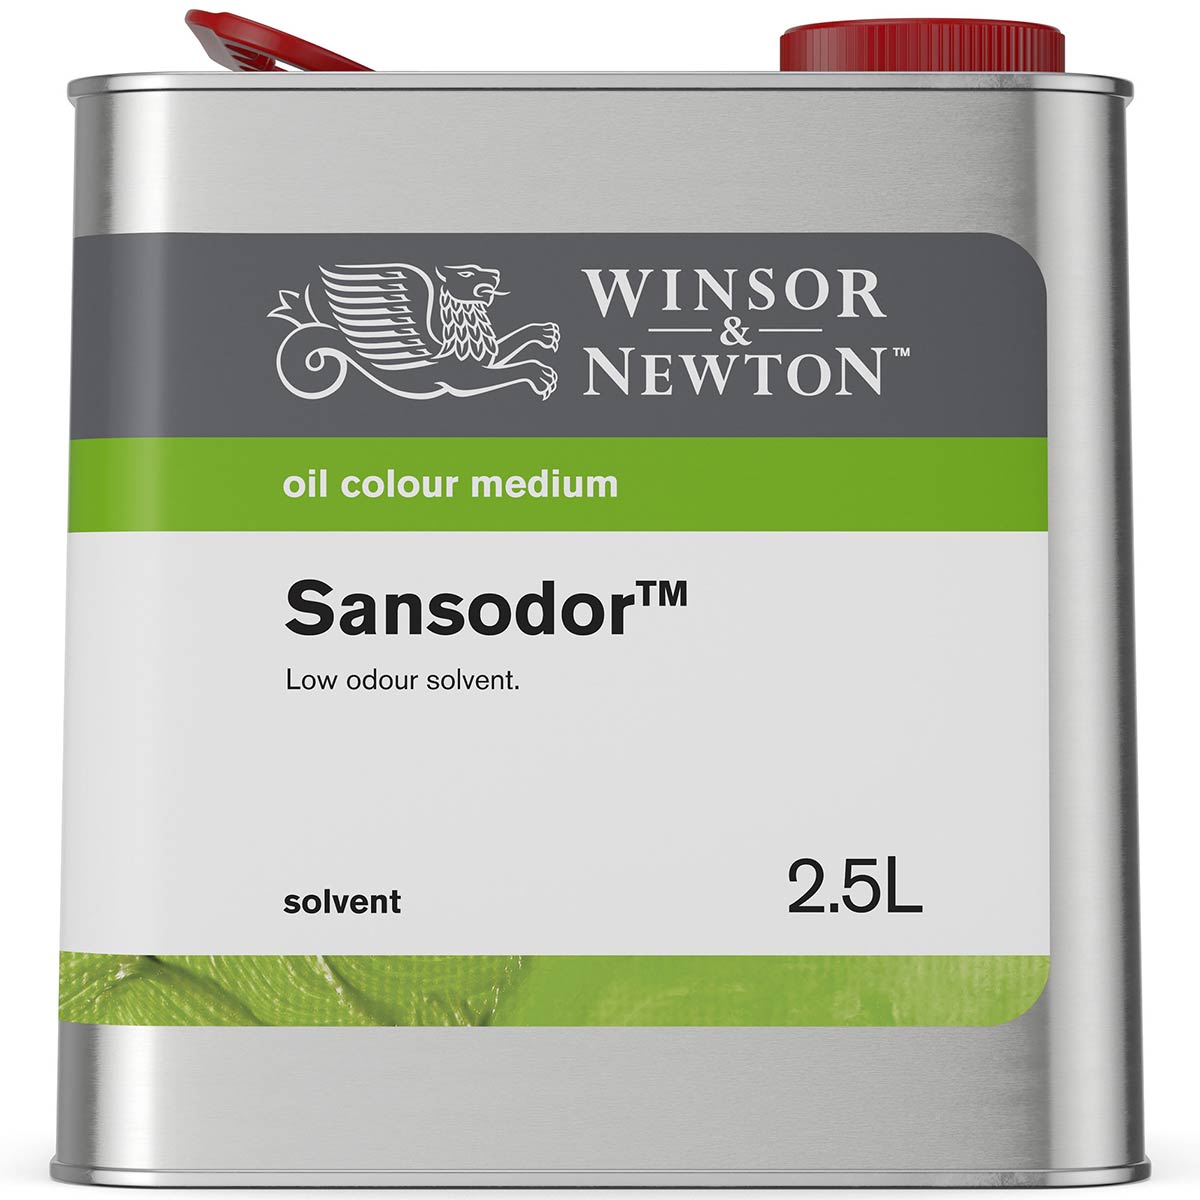 Winsor and Newton - Sansodor Low Odour Solvent Cleaner - 2.5 Litre